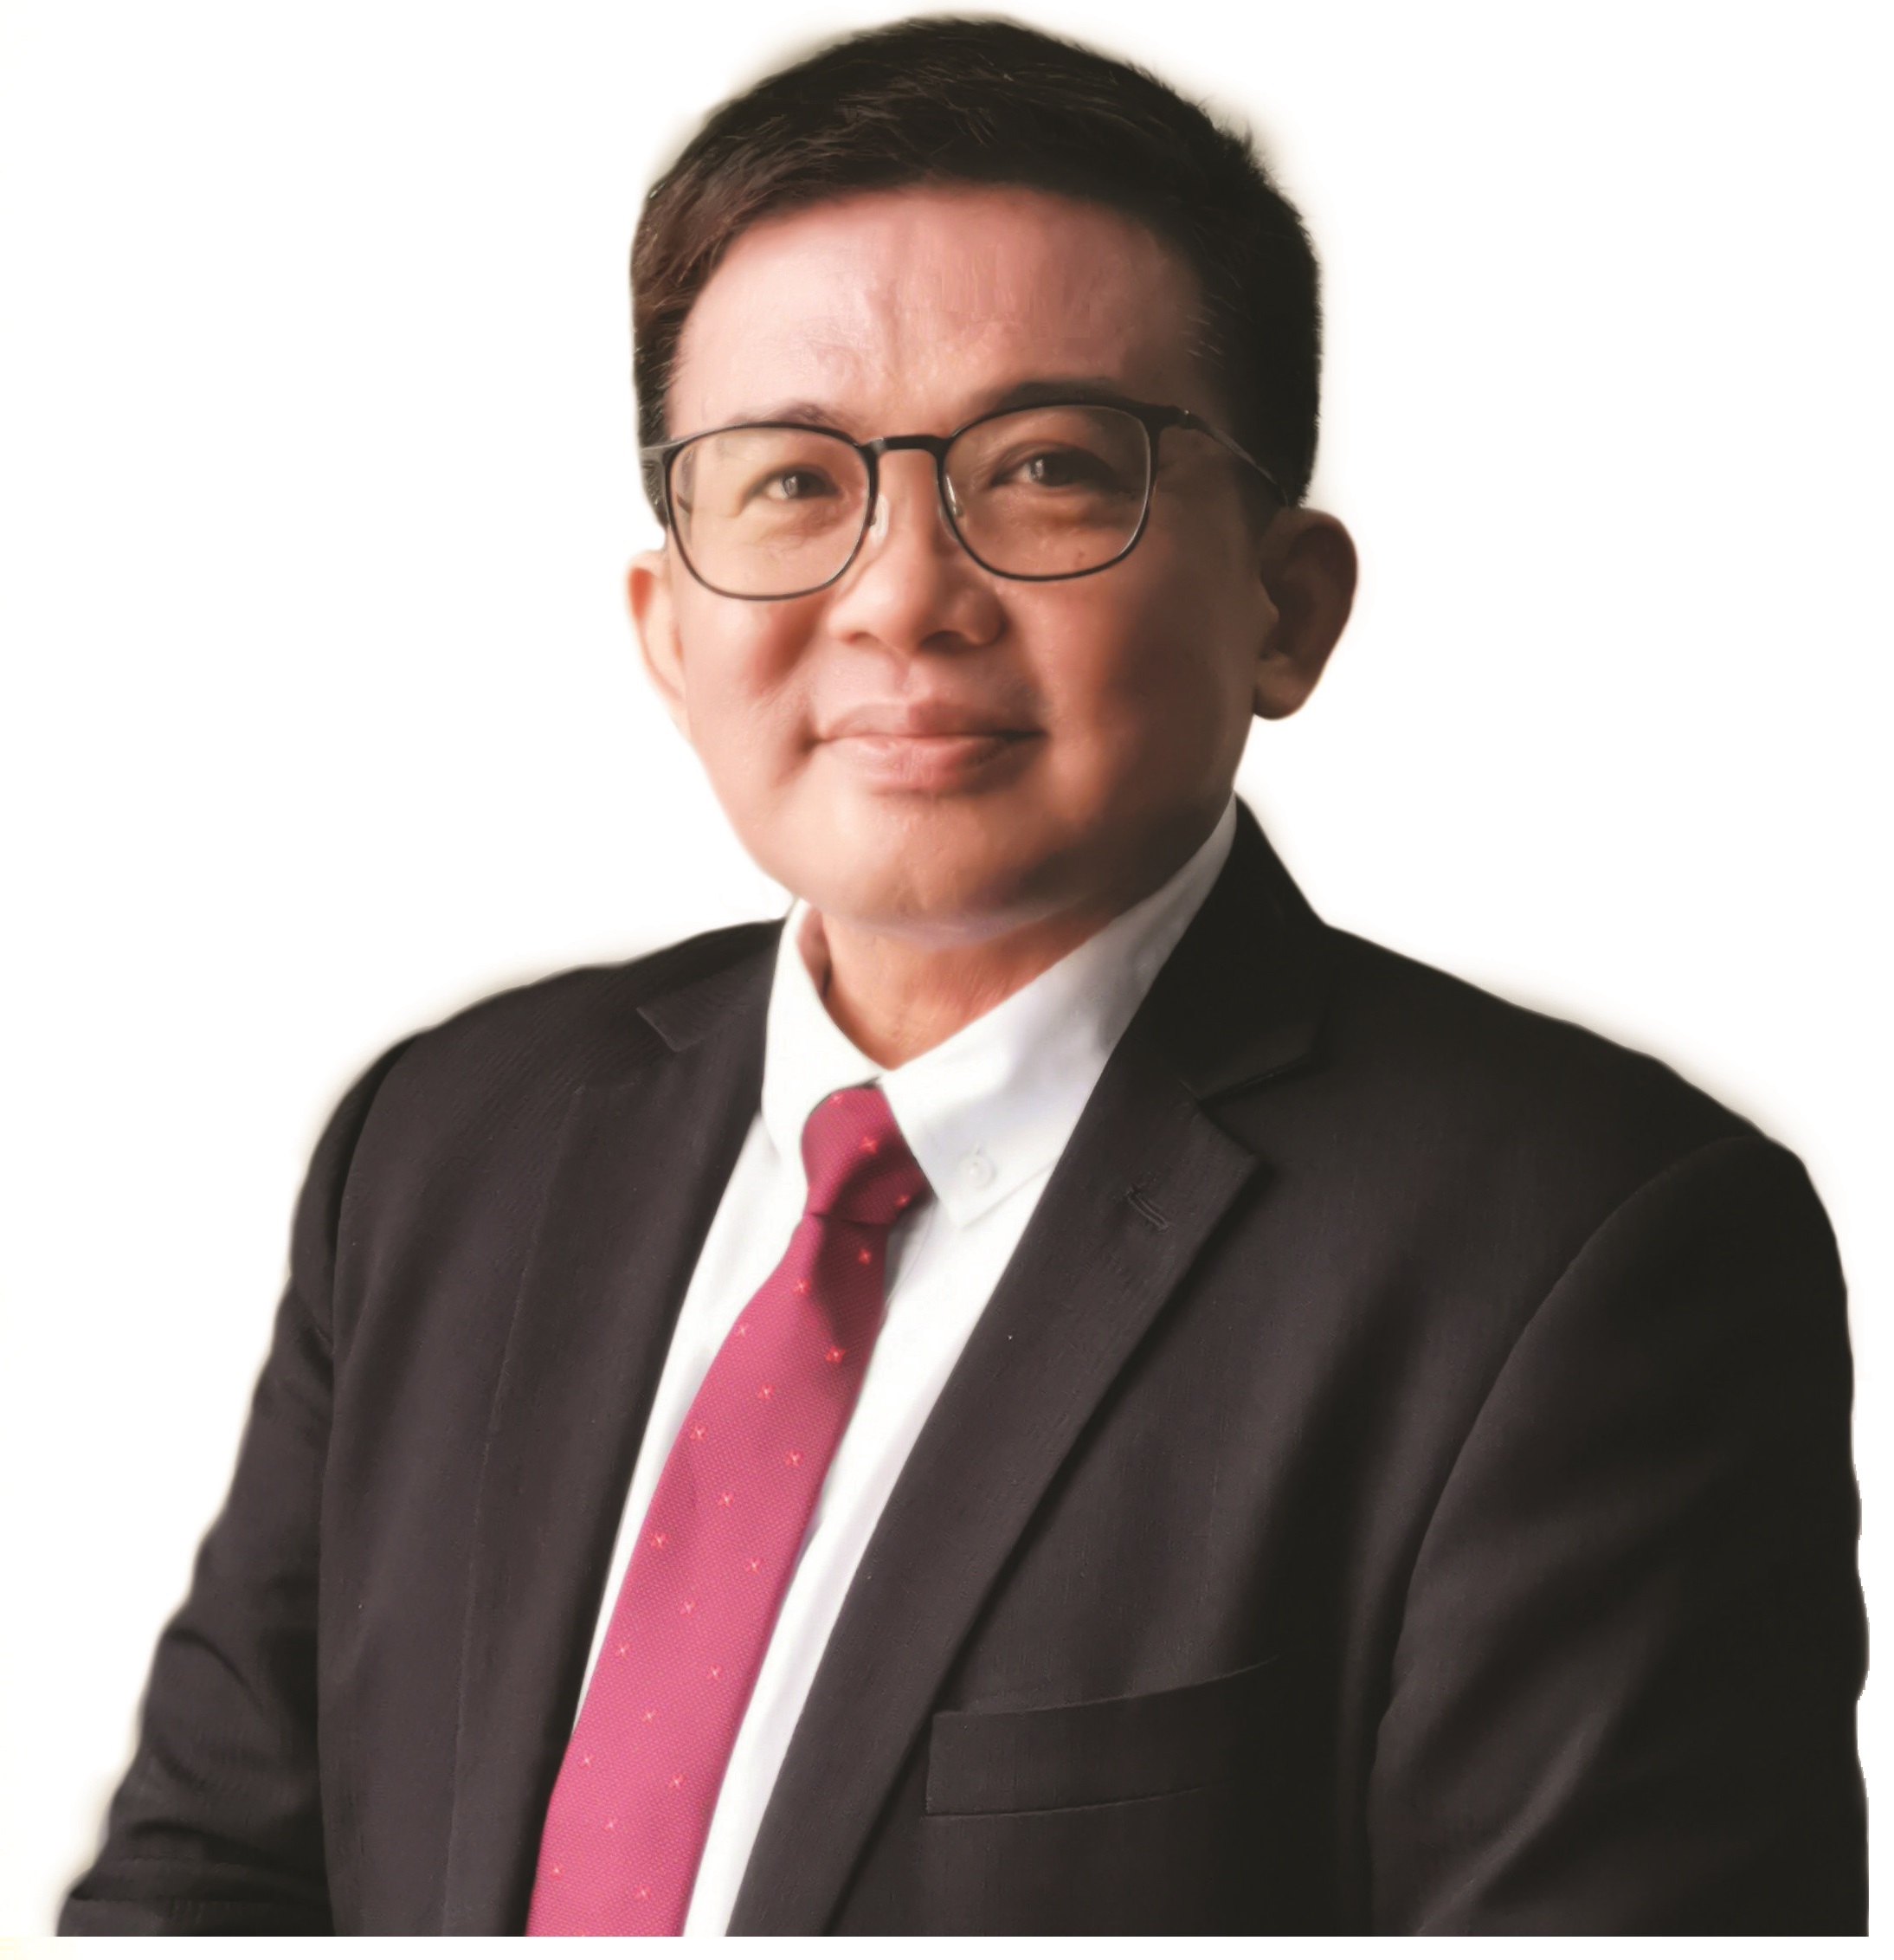 Stephen Yee, <span>Deputy Executive Director, Corporate Learning Centre and Workforce Transformation at Singapore National Employers Federation, Singapore</span>